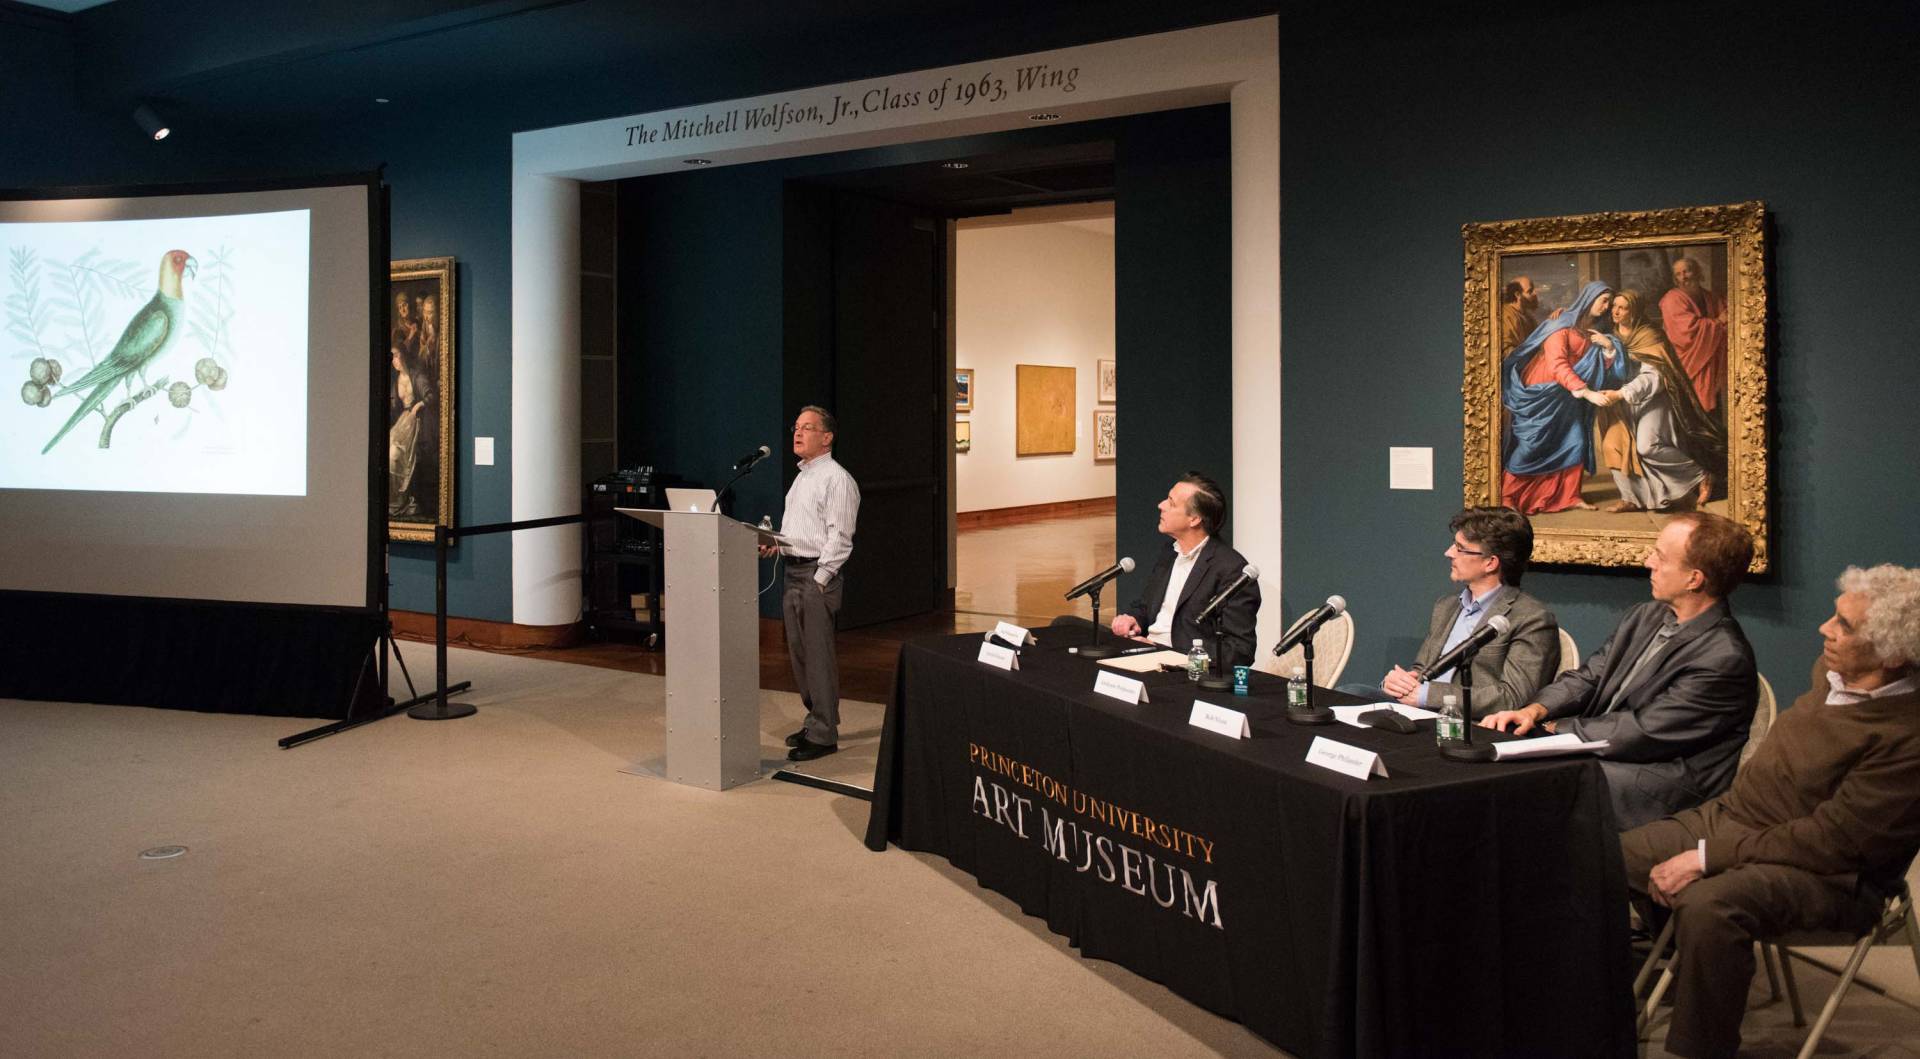 Panel discussion in the Princeton University Museum